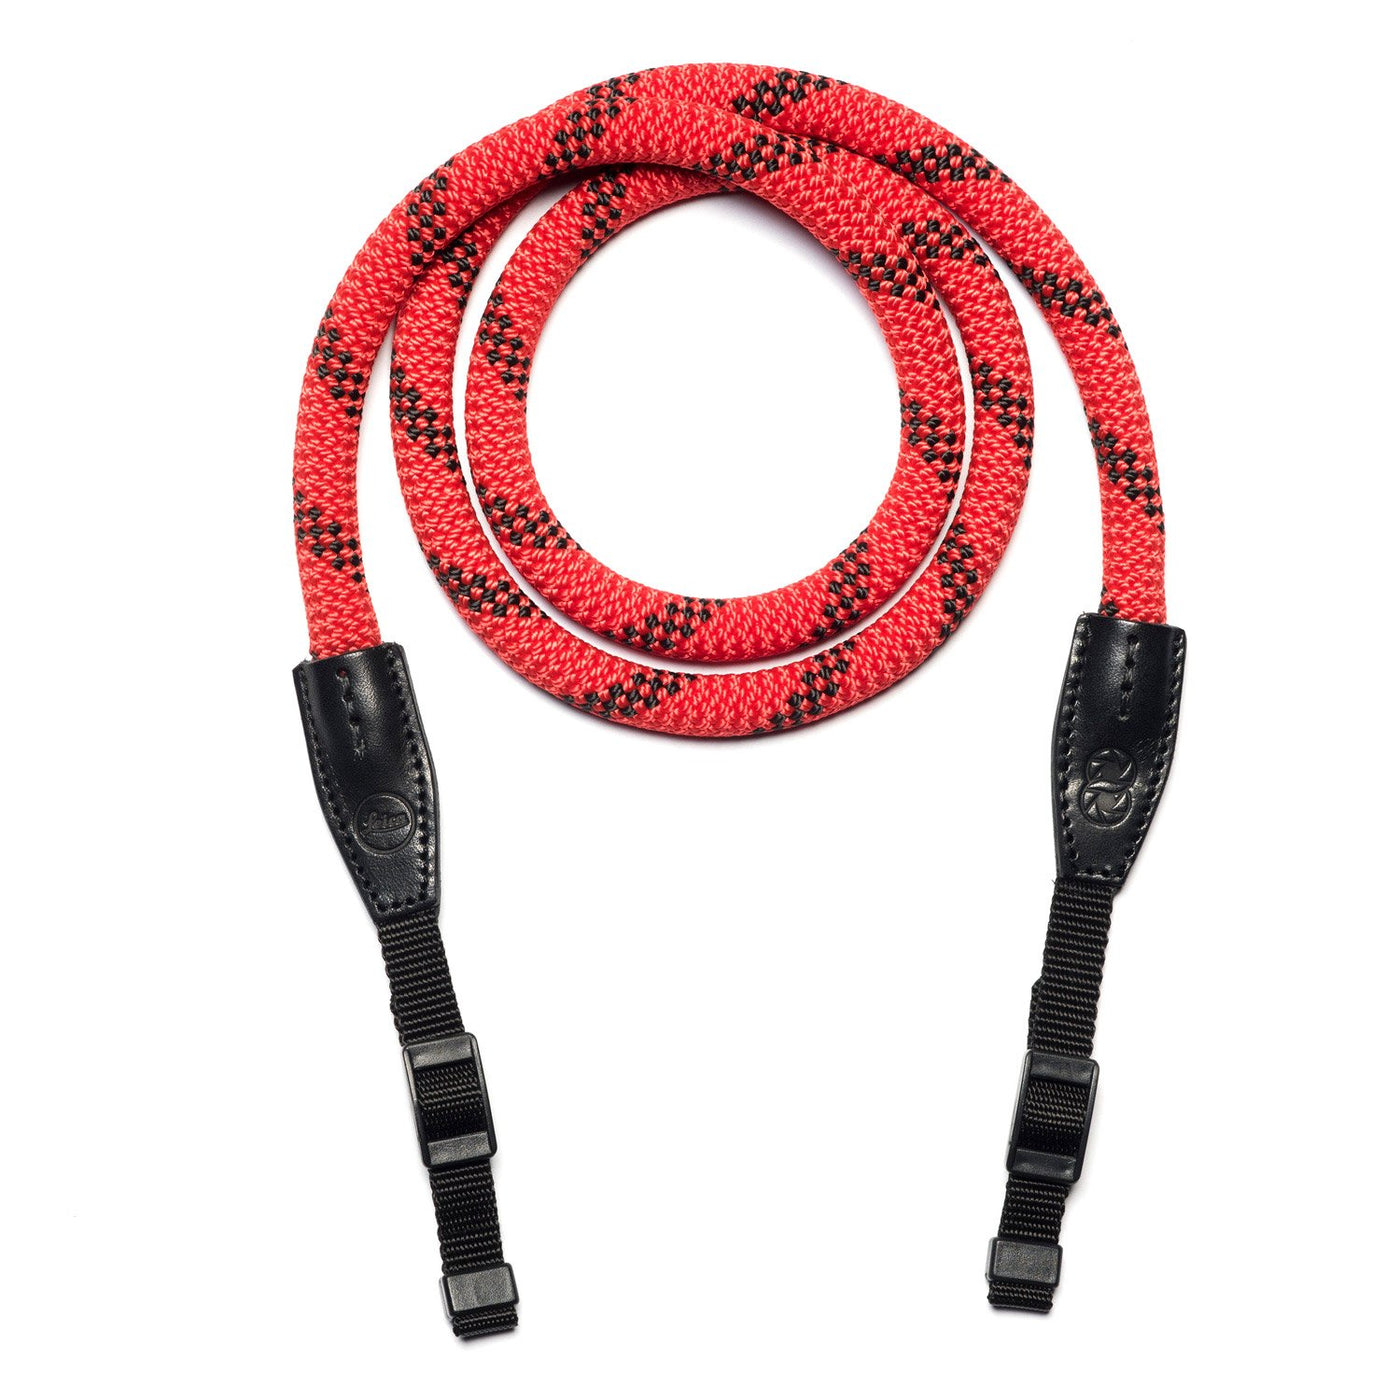 Leica camera strap in a loop with metal rings 